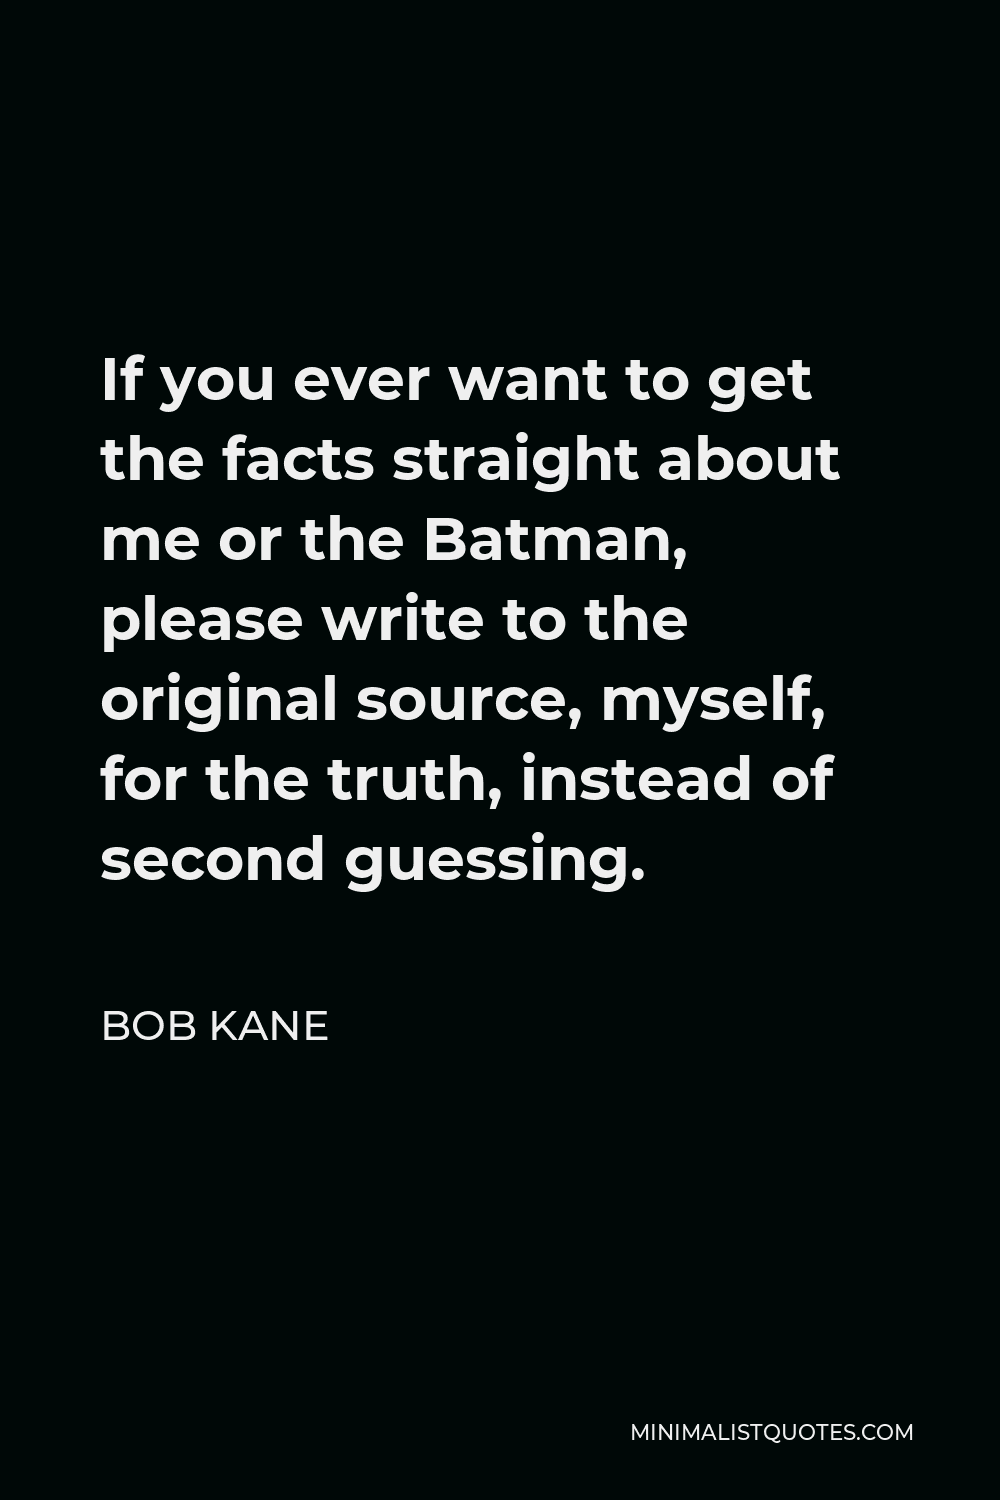 Bob Kane Quote - If you ever want to get the facts straight about me or the Batman, please write to the original source, myself, for the truth, instead of second guessing.